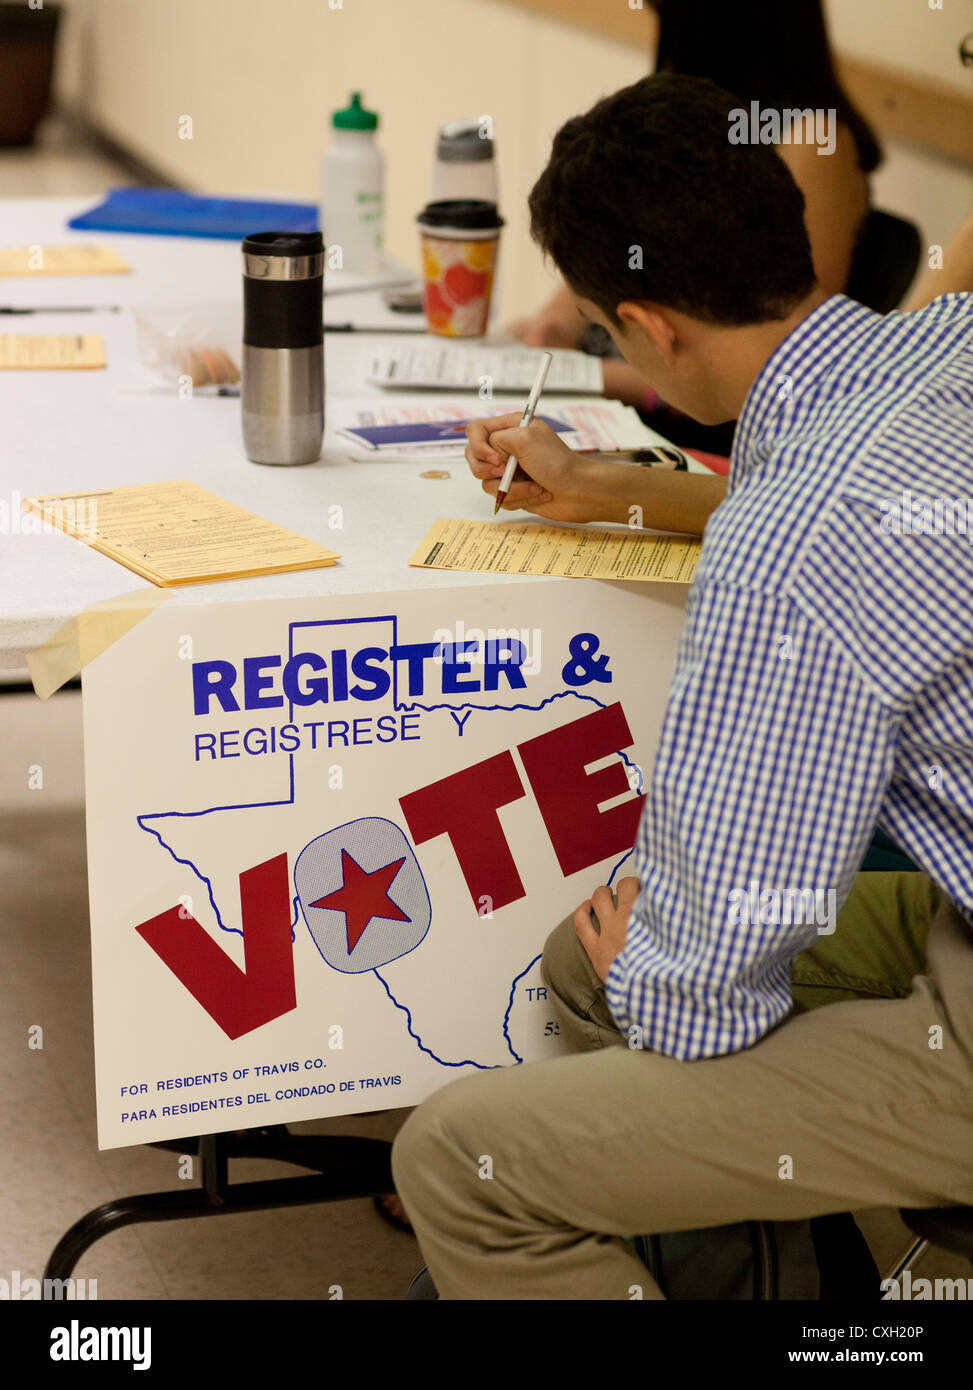 Volunteers conduct a voter registration drive for 18-year-olds at high school in Austin, TX. Many will be 1st-time voters n the Nov. 2012 election. Stock Photo